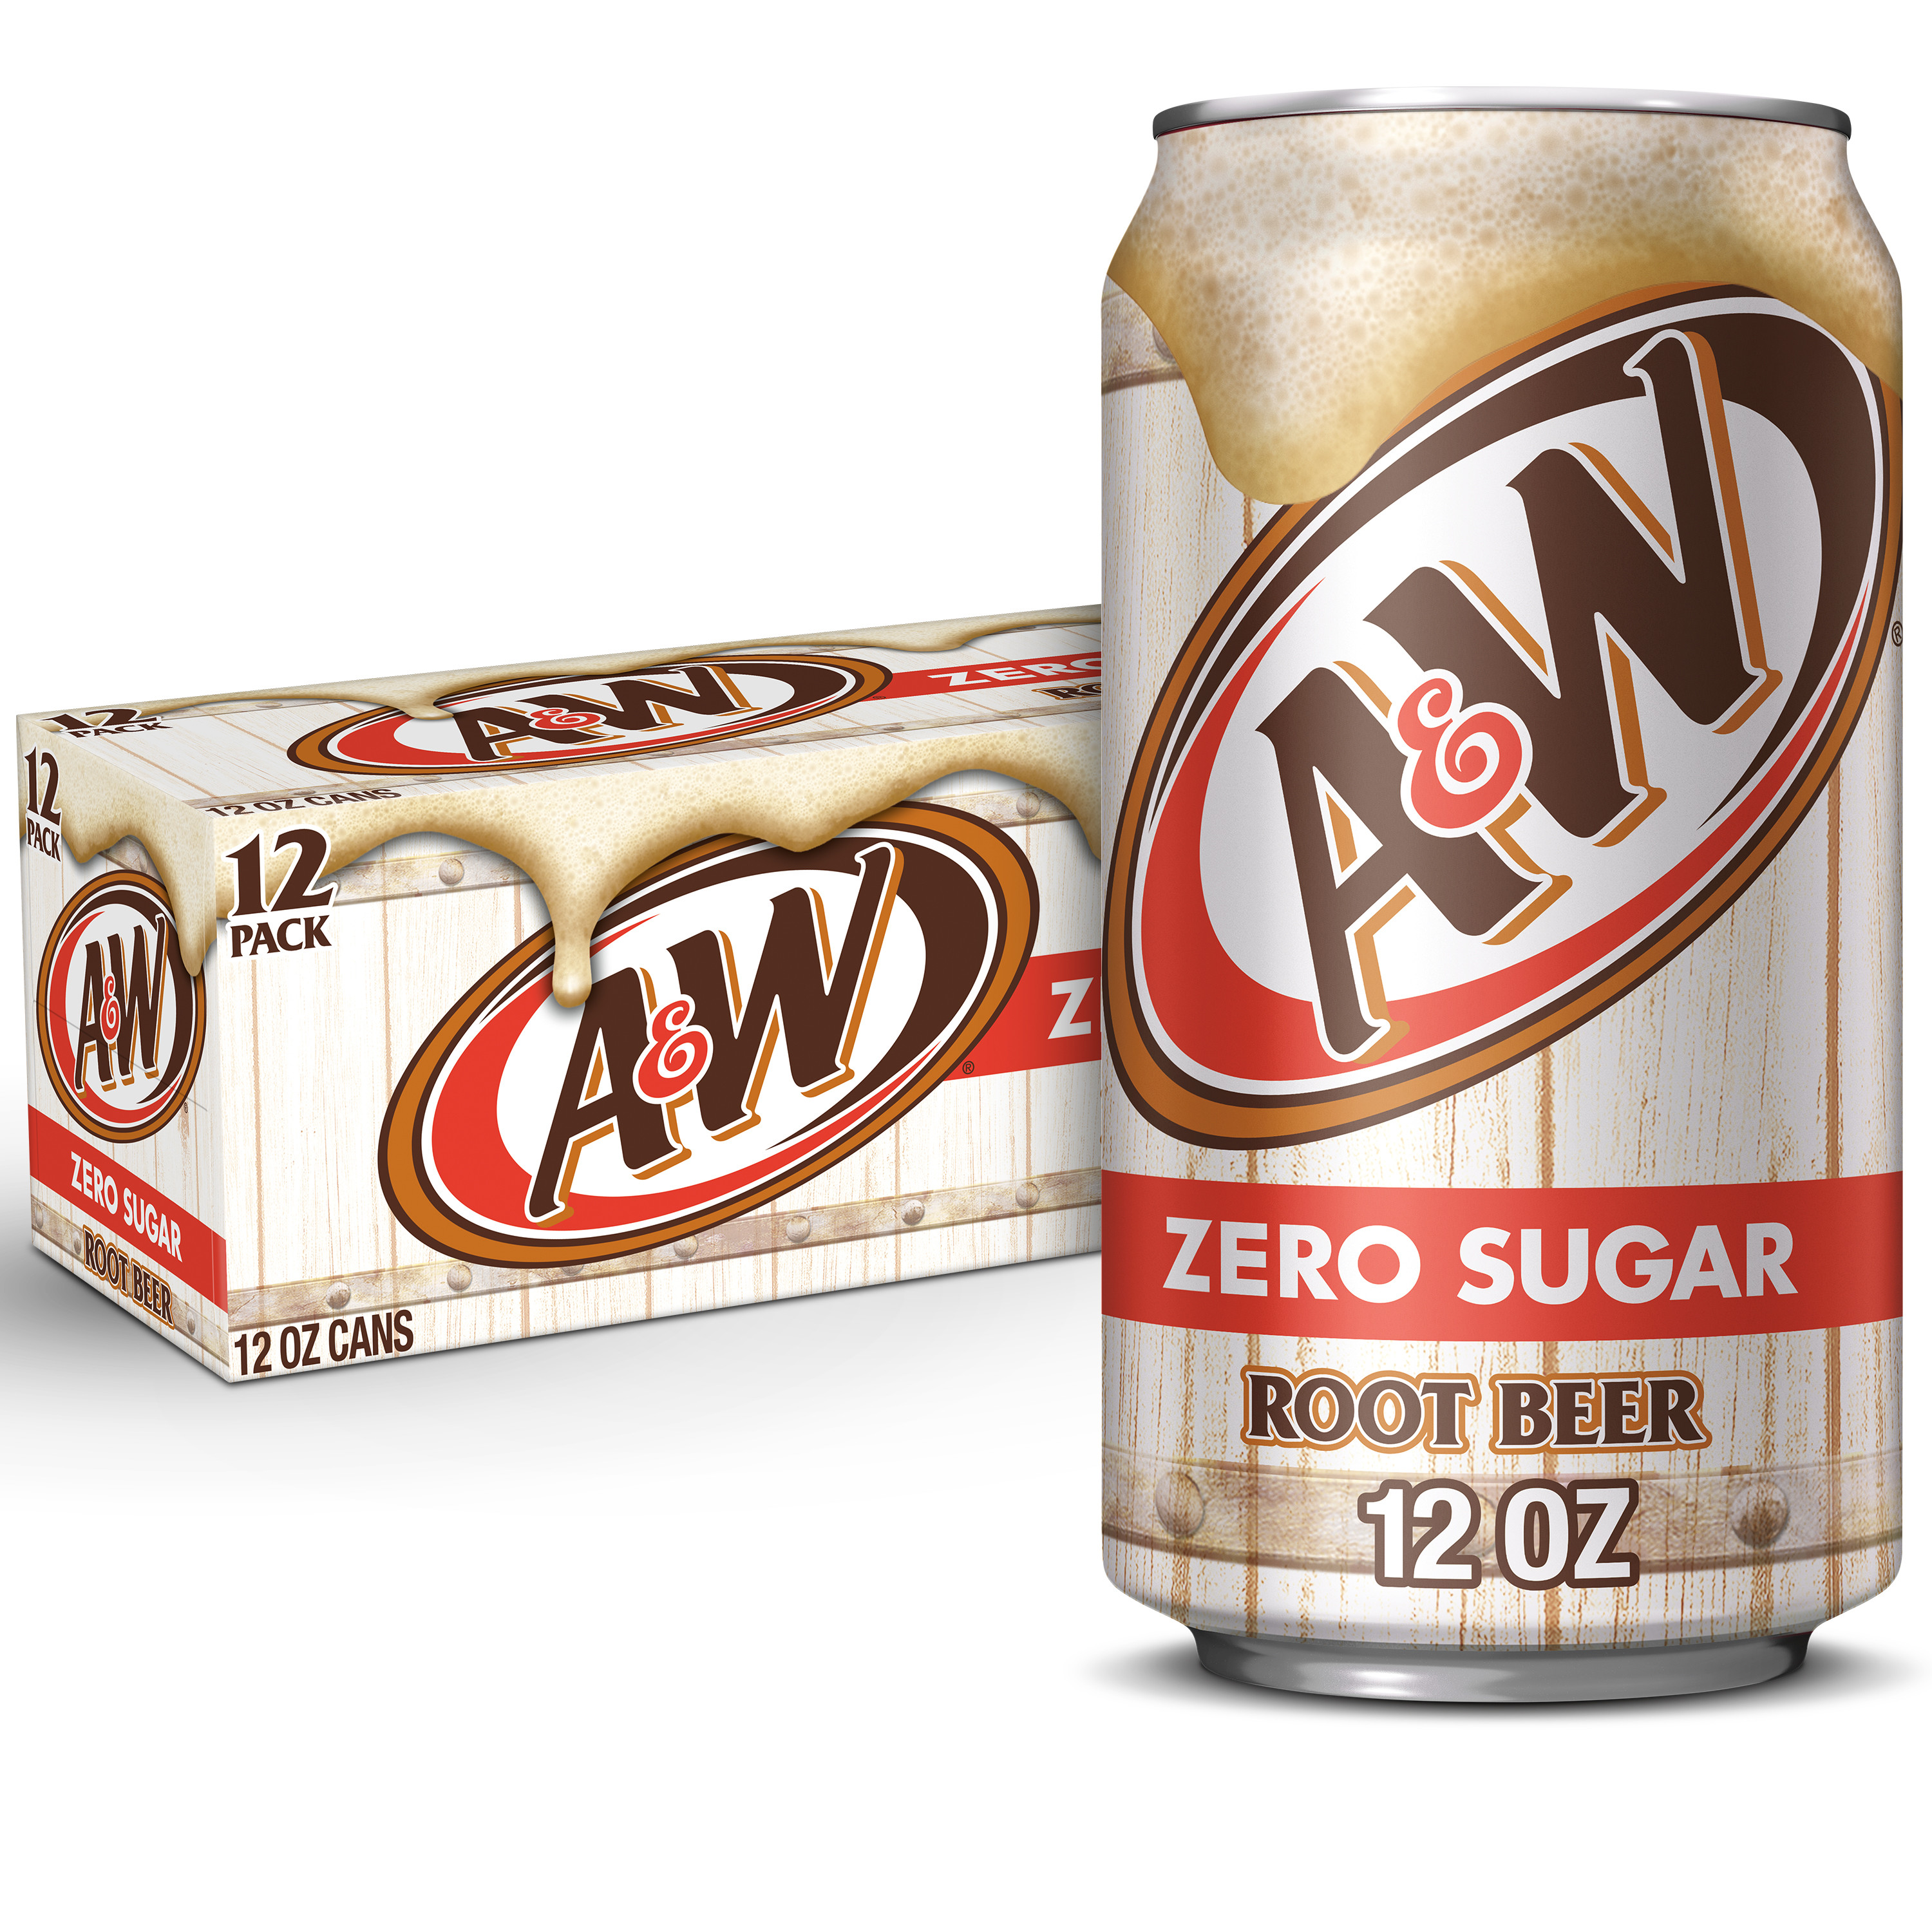 A&W Zero Sugar Root Beer Soda Pop, 12 fl oz, 12 Pack Cans - image 1 of 13